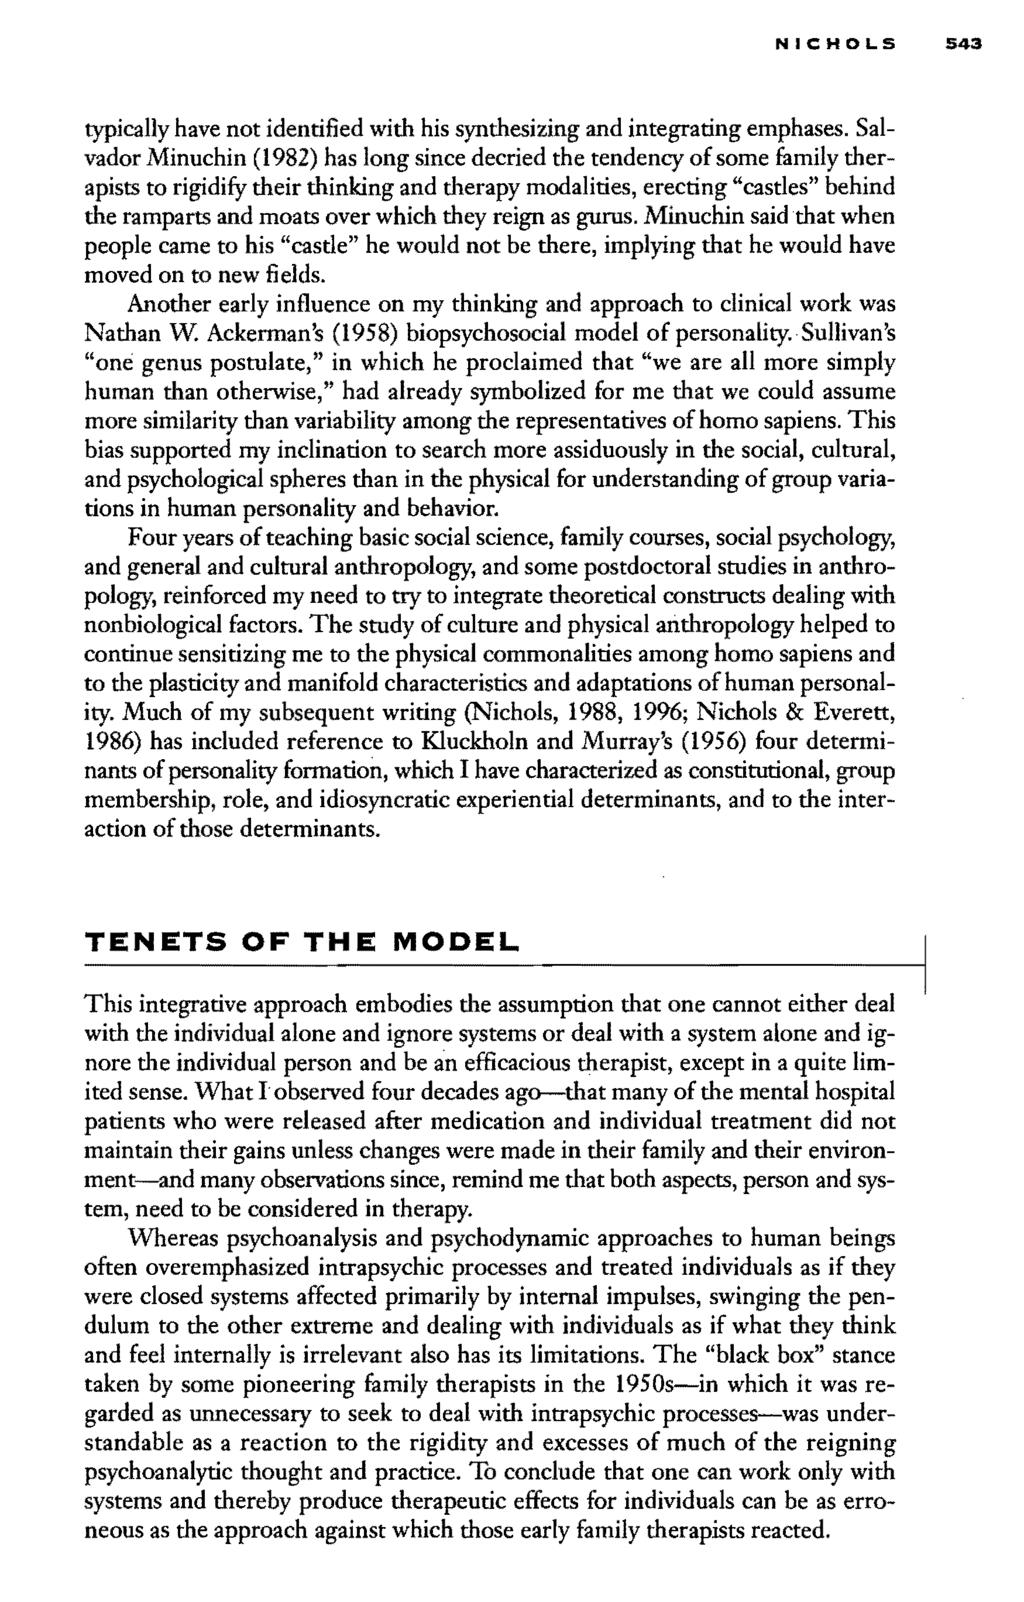 NICHOLS 543 typically have not identified with his synthesizing and integrating emphases.